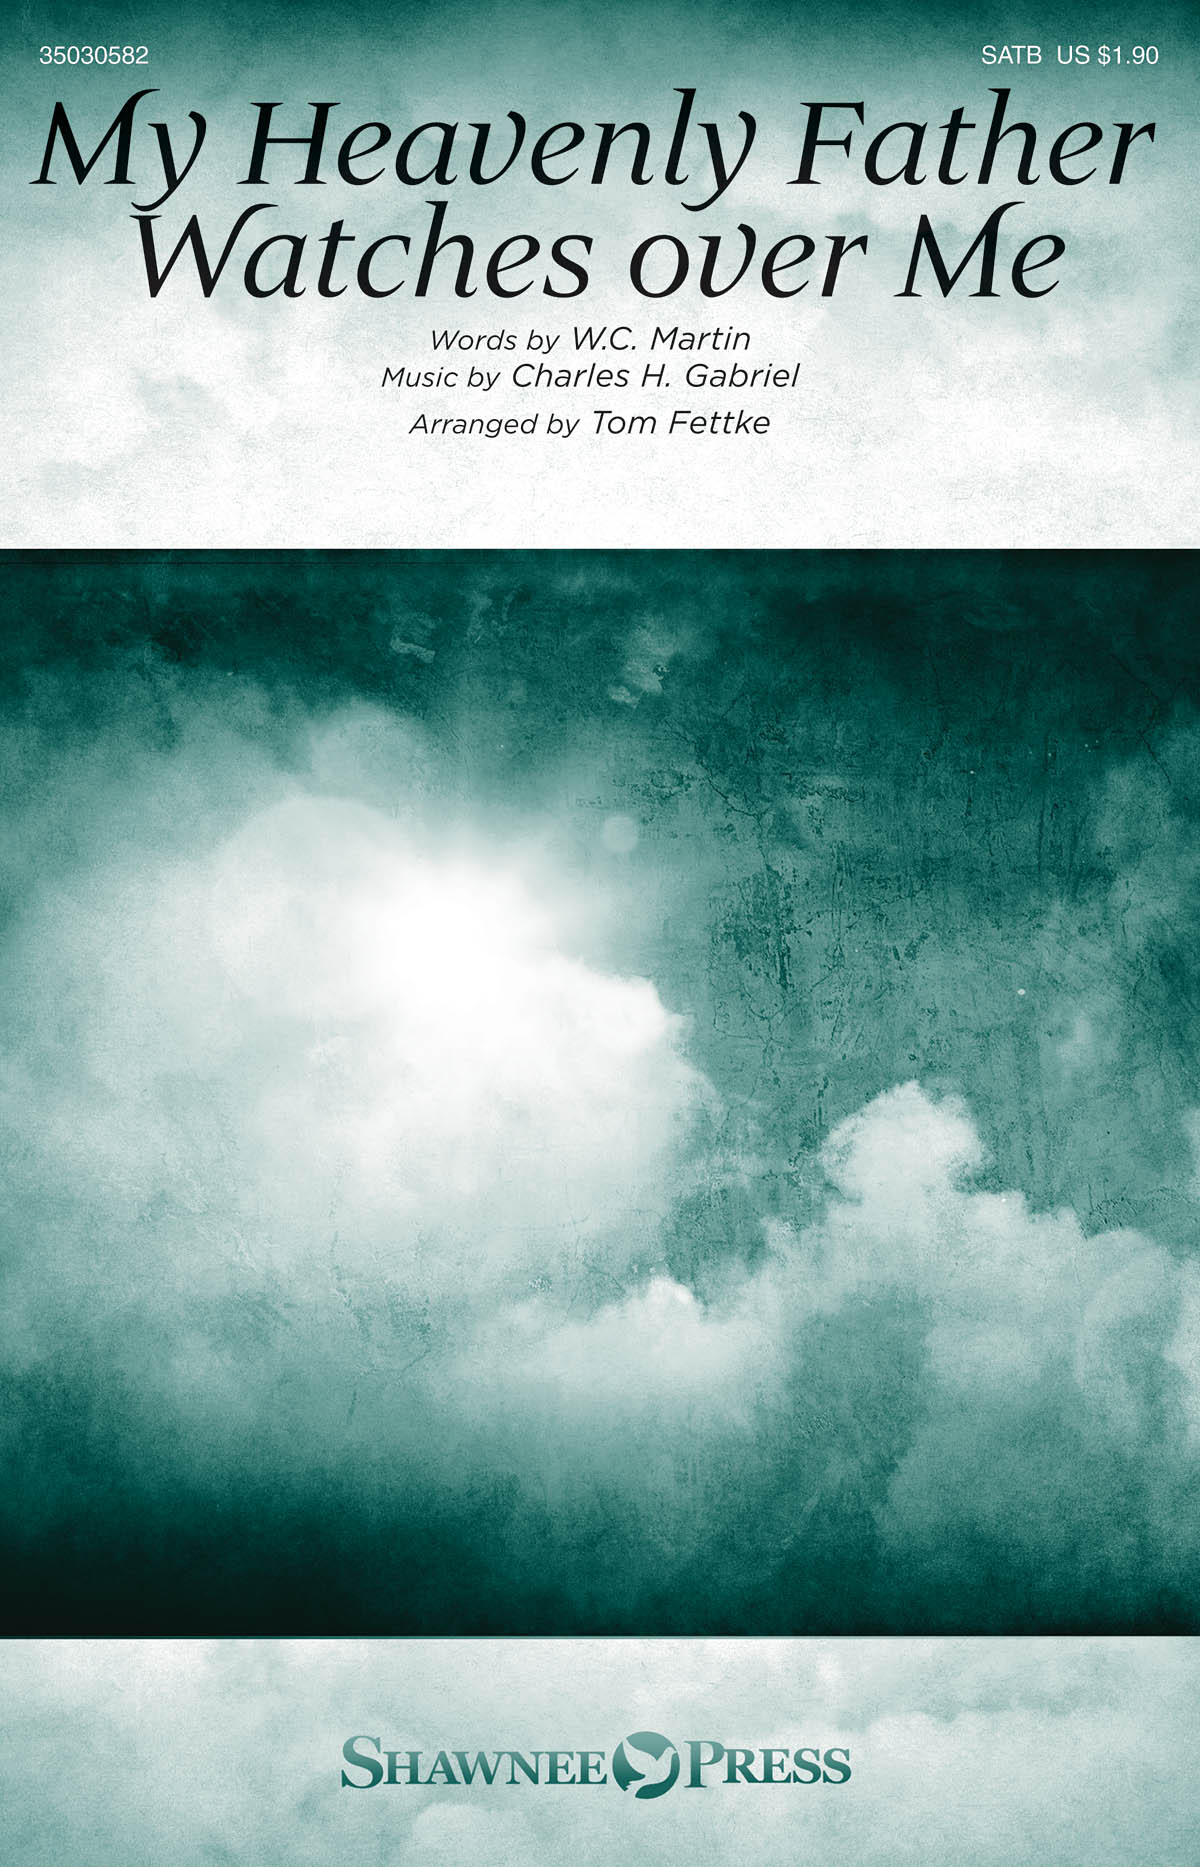 W.C. Martin Charles H. Gabriel: My Heavenly Father Watches Over Me: SATB: Vocal